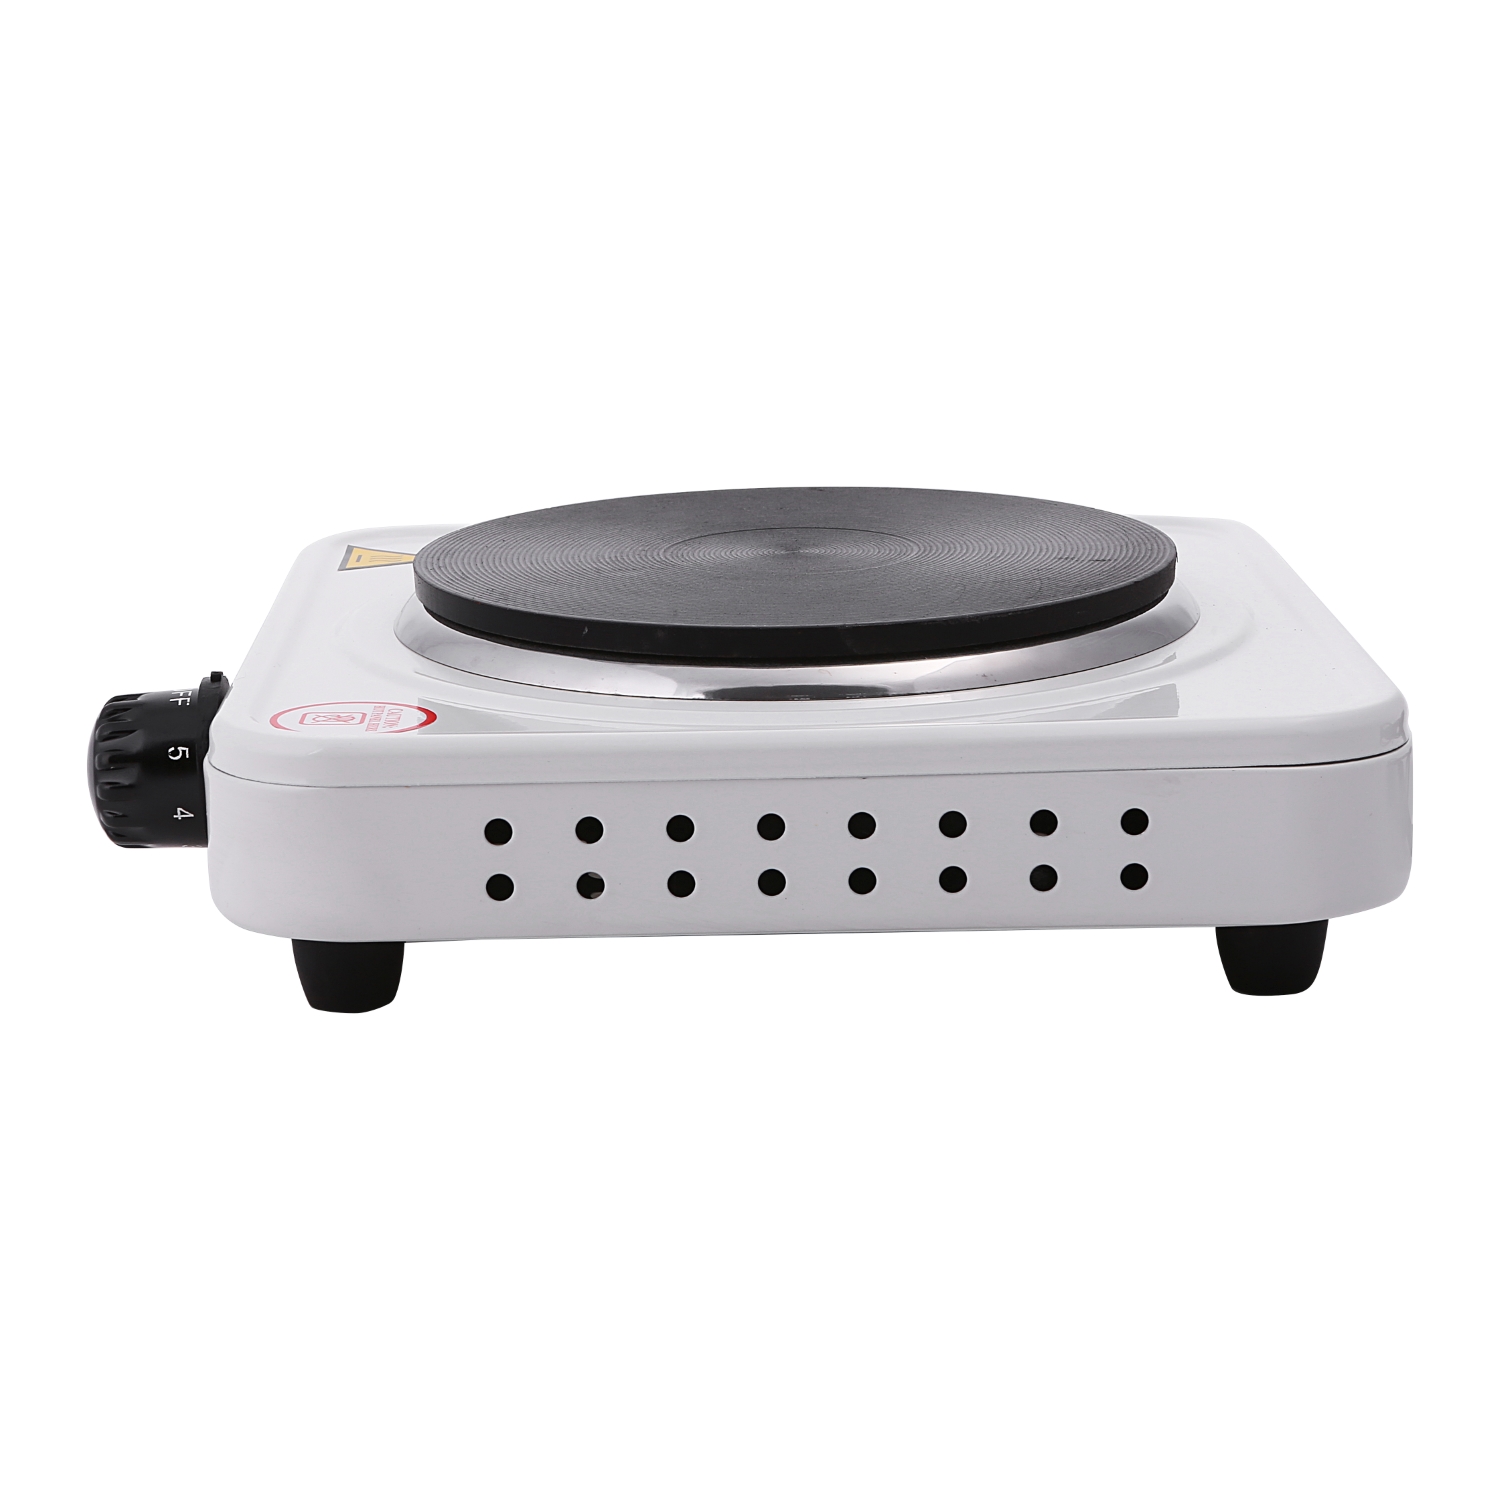 Geepas 1000W Single Hot Plate for Flexible & Precise Table Top Cooking -  Cast Iron Heating Plate (